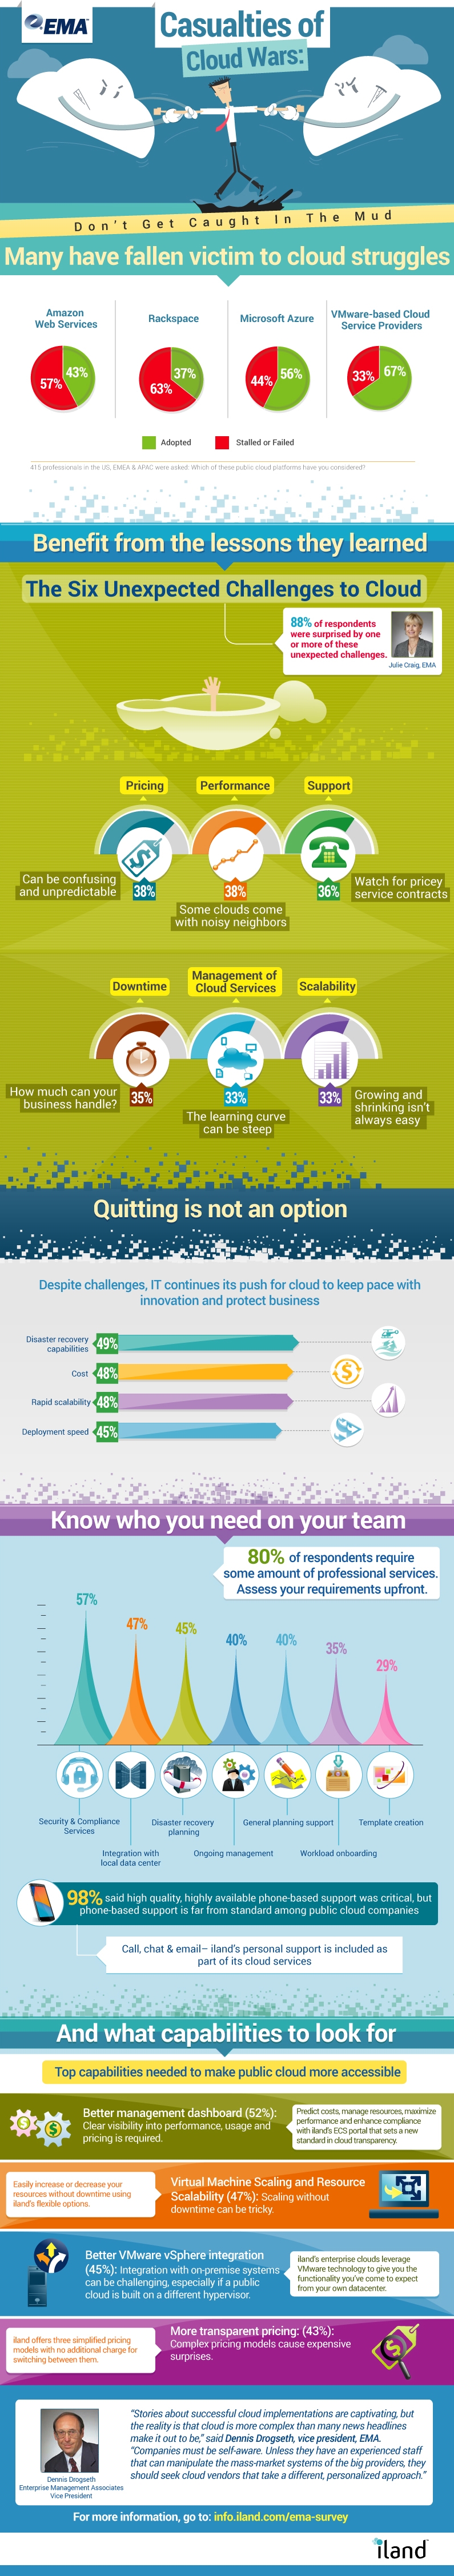 Infographic - Casualties of Cloud Wars: Avoid the pitfalls